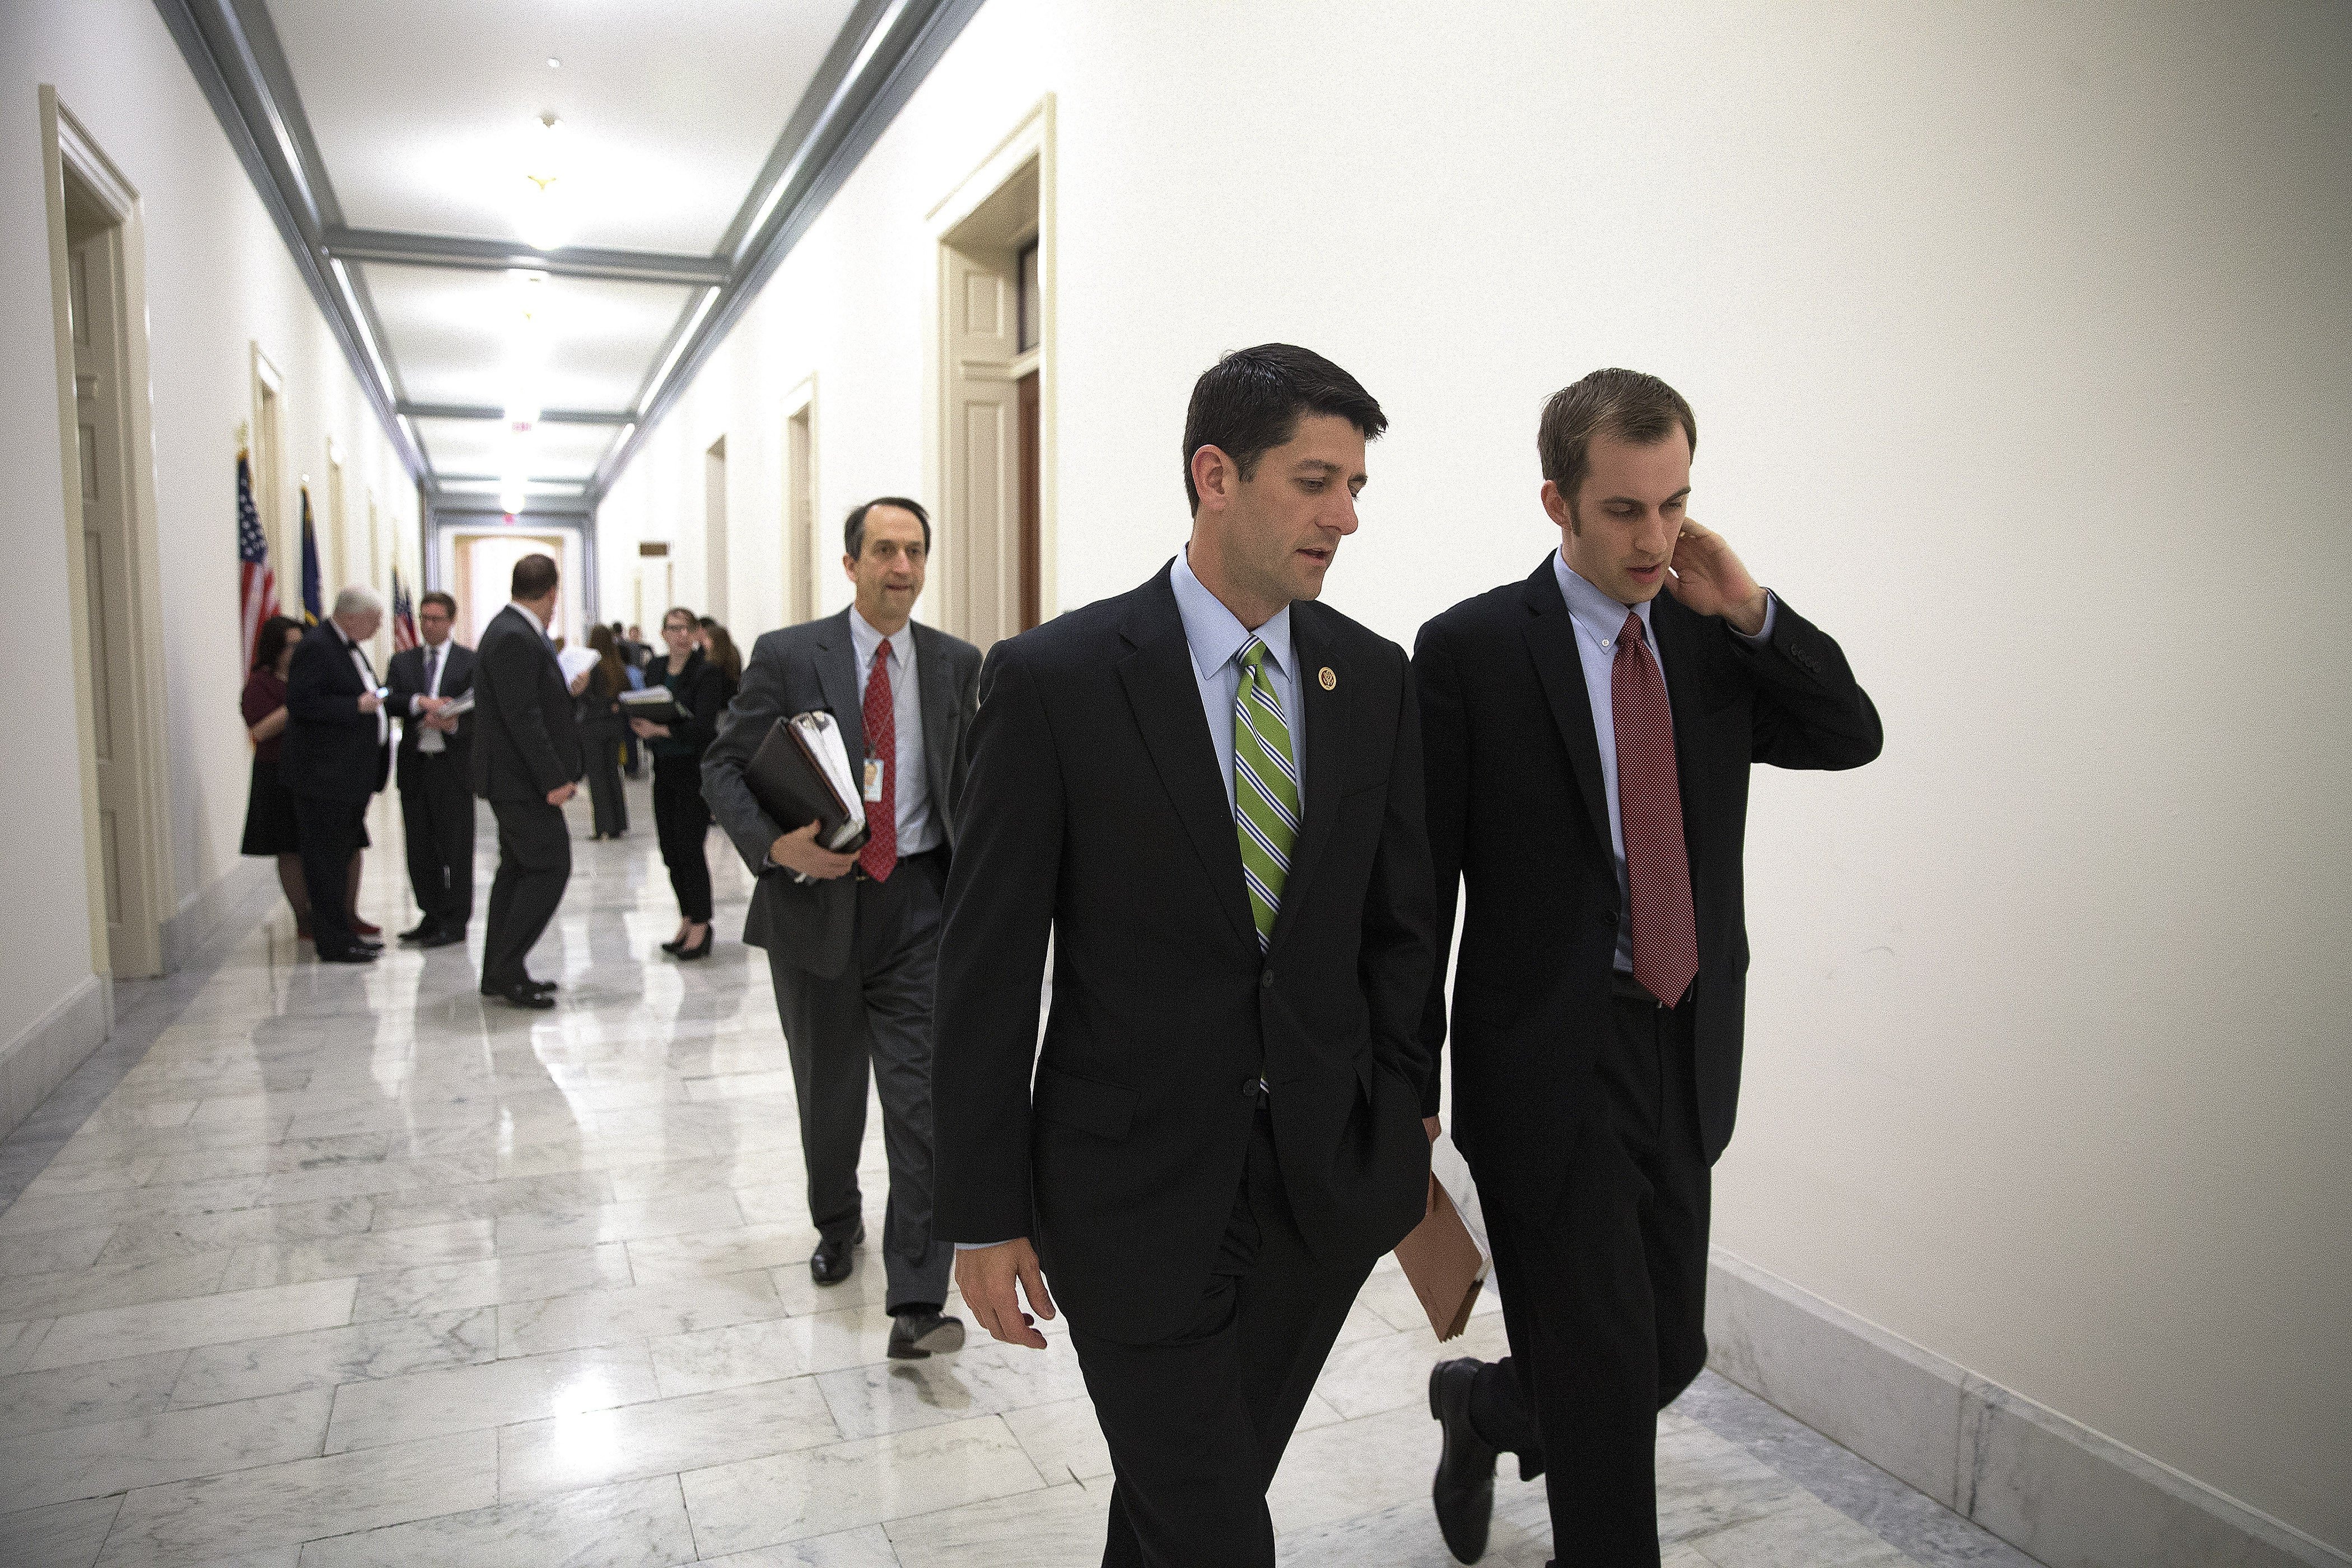 Rep. Paul Ryan, chairman of the House Budget Committee, walks with his staff following a meeting on the newest Republican budget for 2015 on Capitol Hill, in Washington, April 2, 2014. (Doug Mills—The New York Times/Redux)